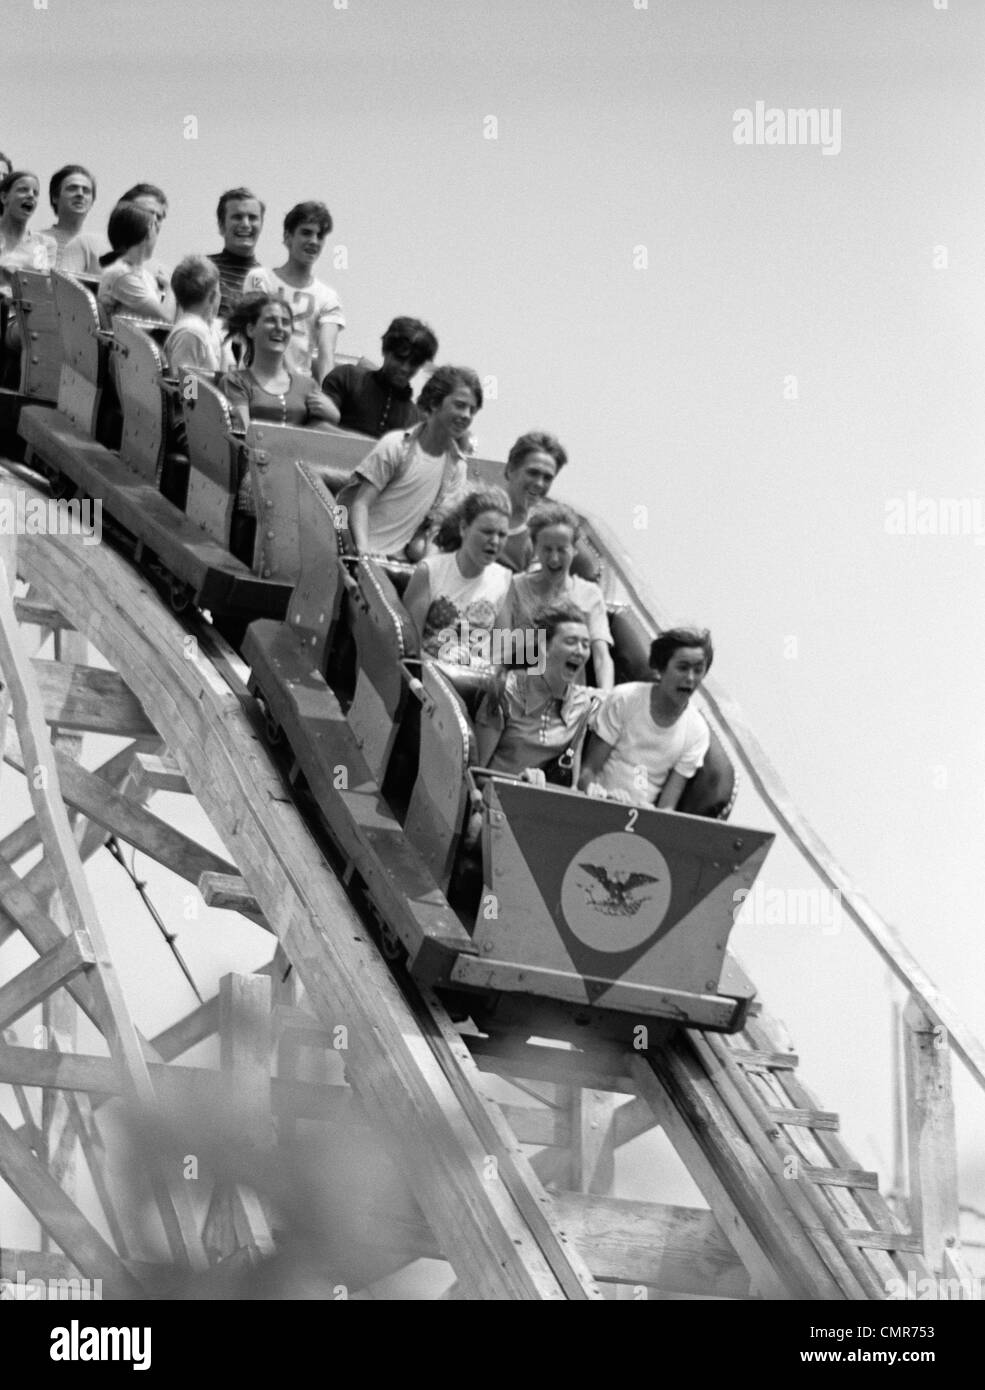 1960s ROLLER COASTER STARTING TO GO DOWN HILL Stock Photo